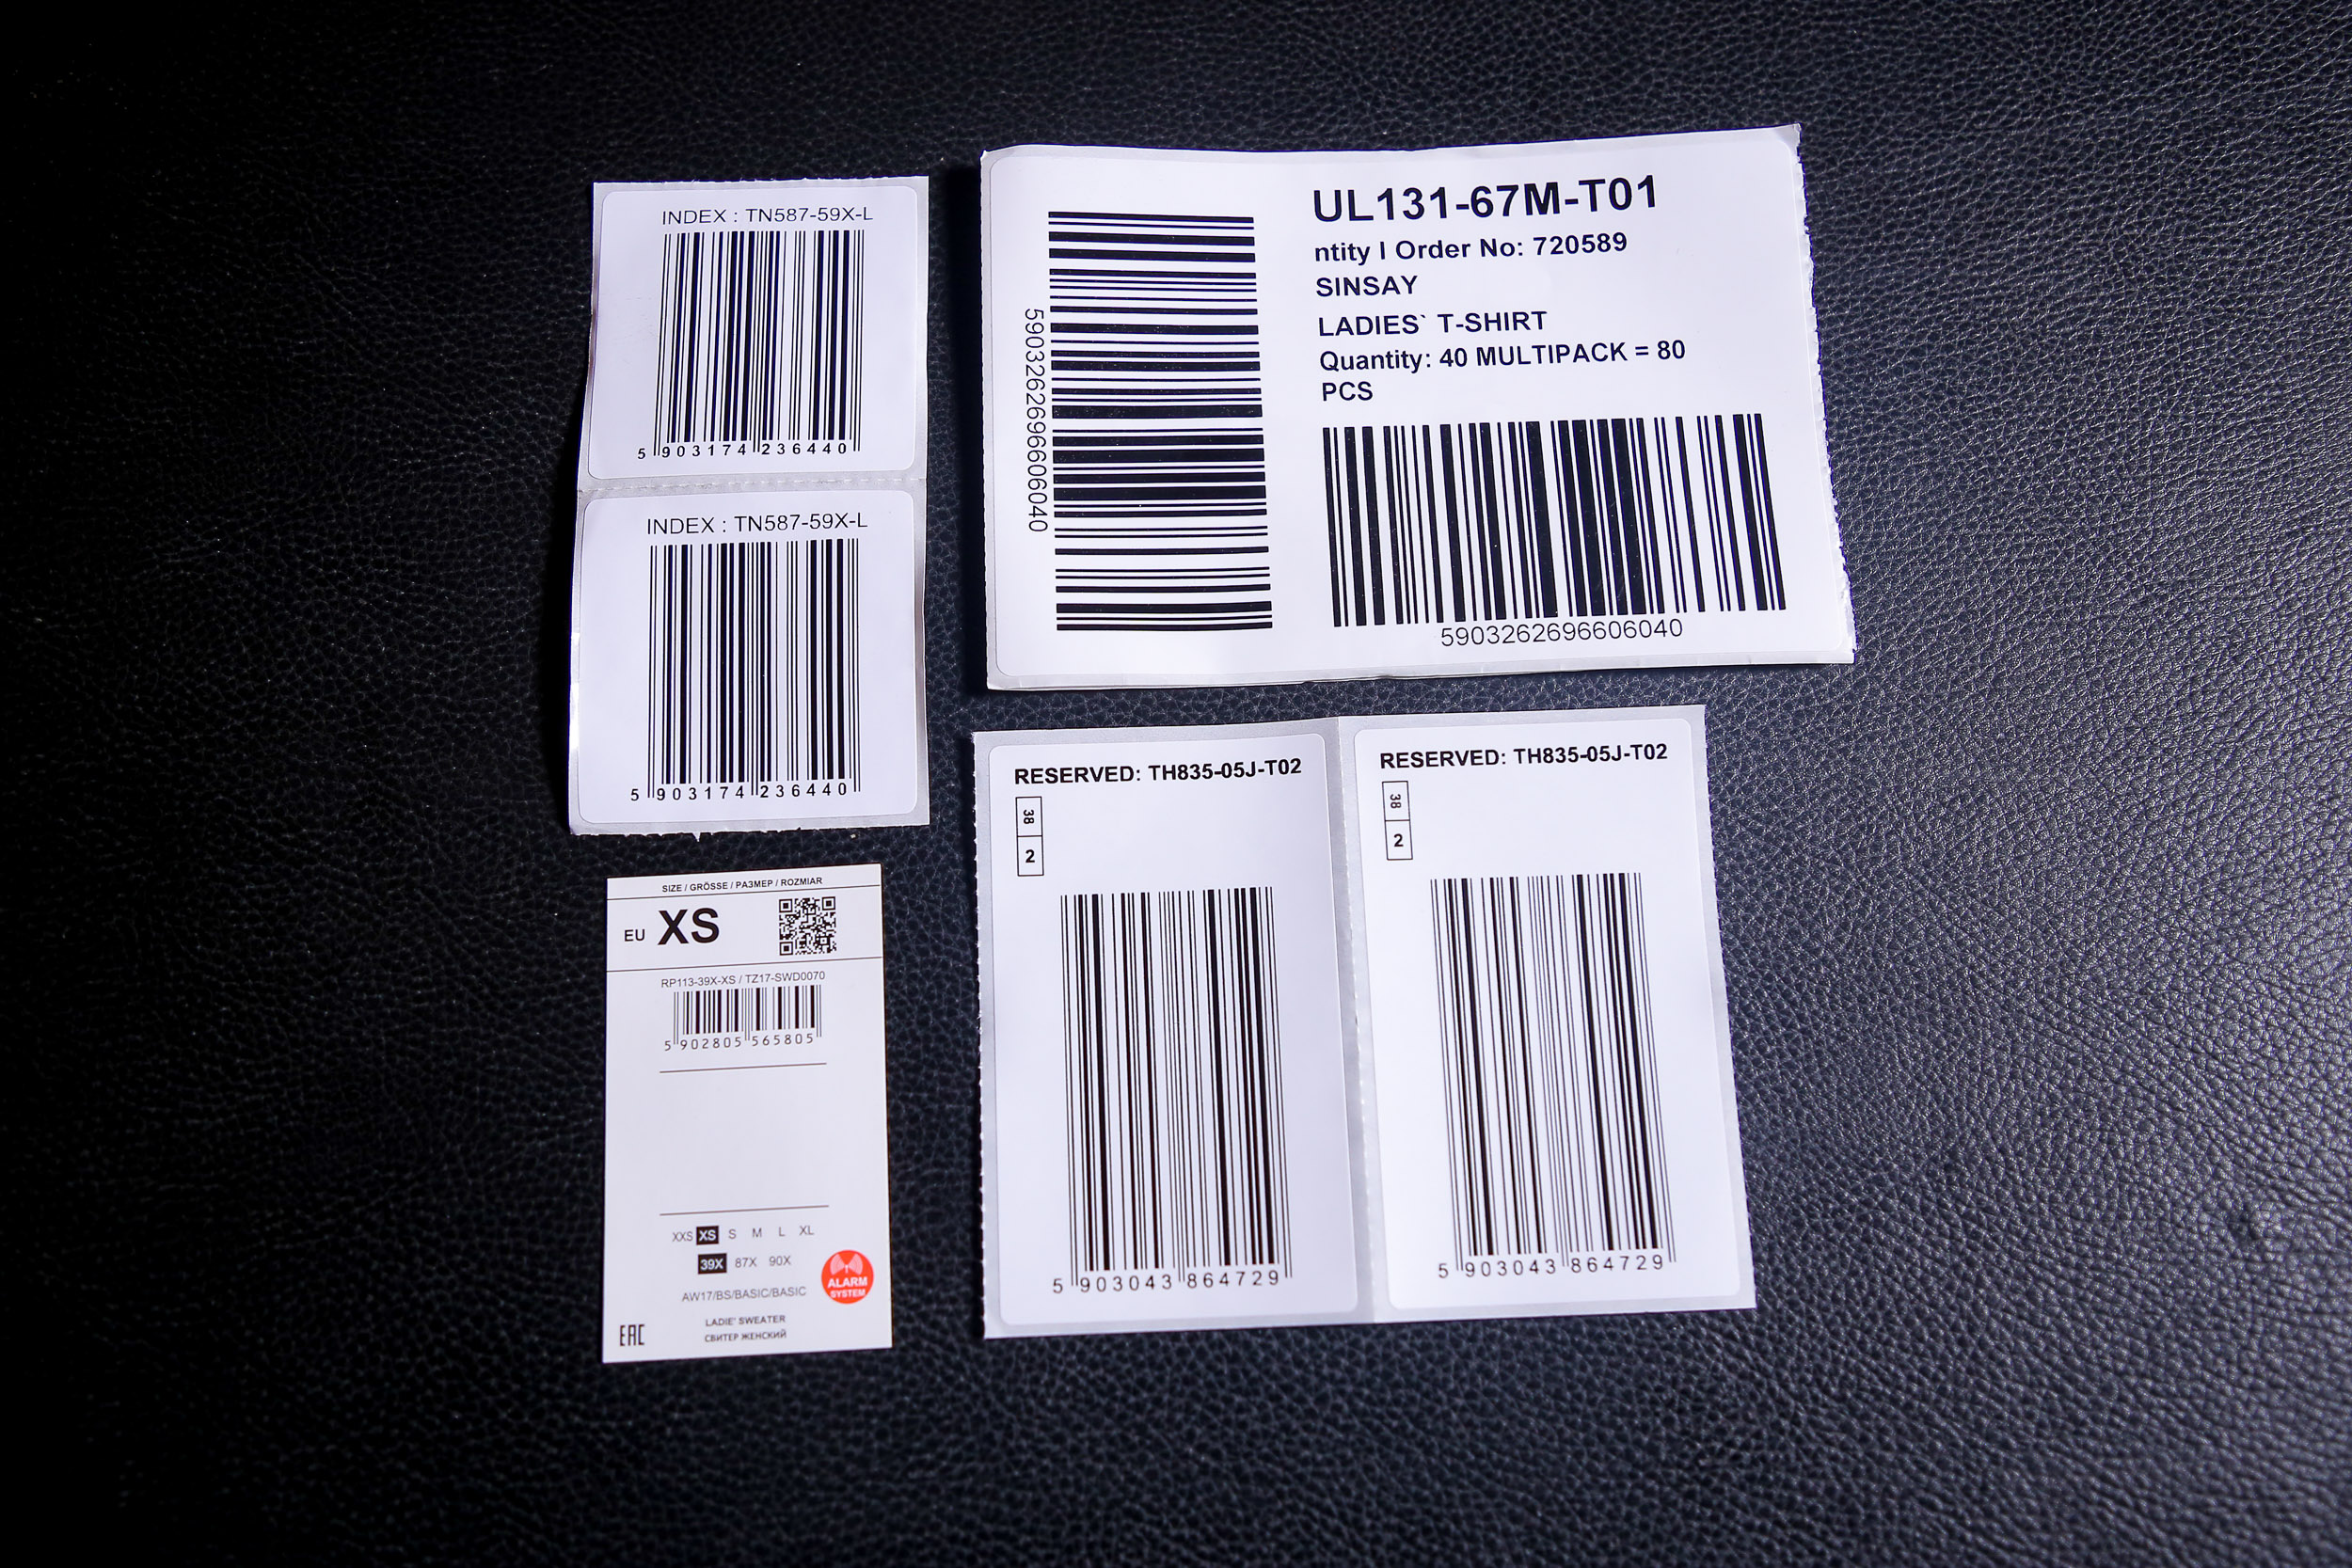 <h2>WOVEN LABEL</h2>